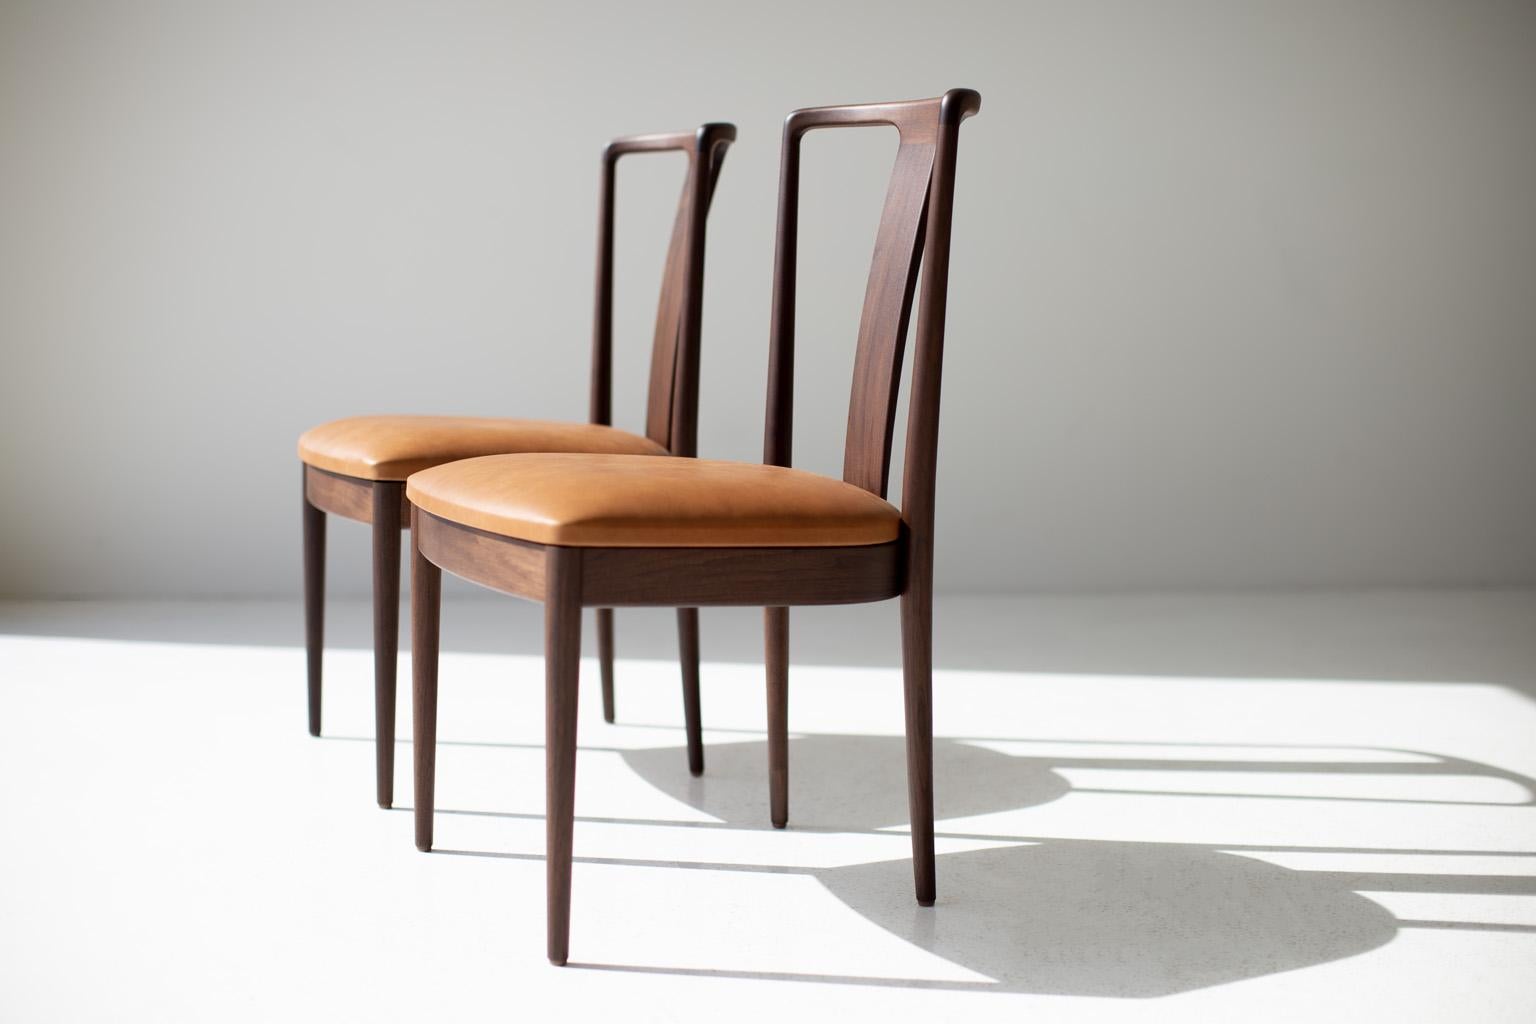 American Derby Dining Chairs, Modern Wood Dining Chairs, Walnut, Leather, Peabody, Craft For Sale